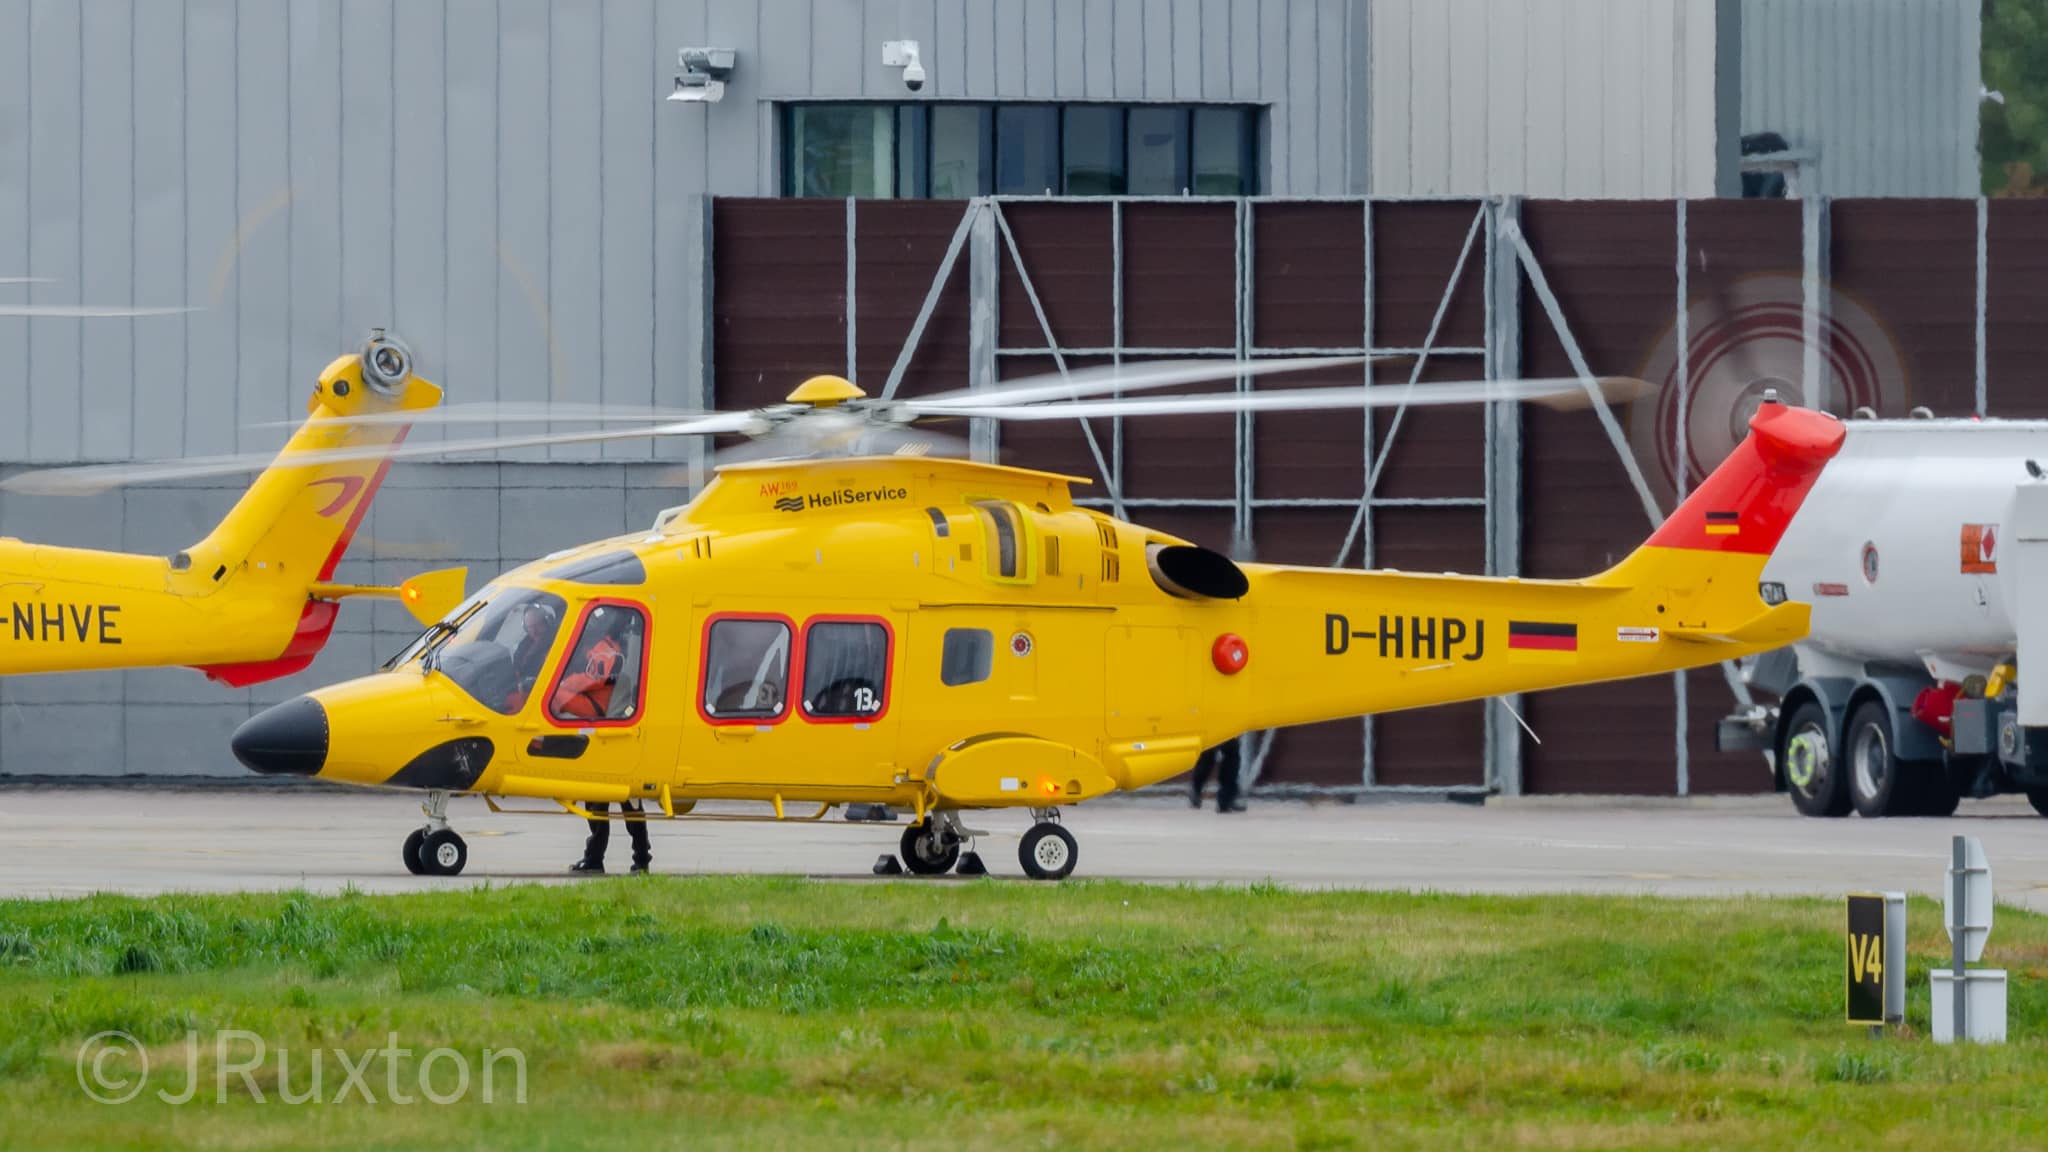 NHV Group due to start offshore contract at Blackpool Airport with new AW169 helicopter